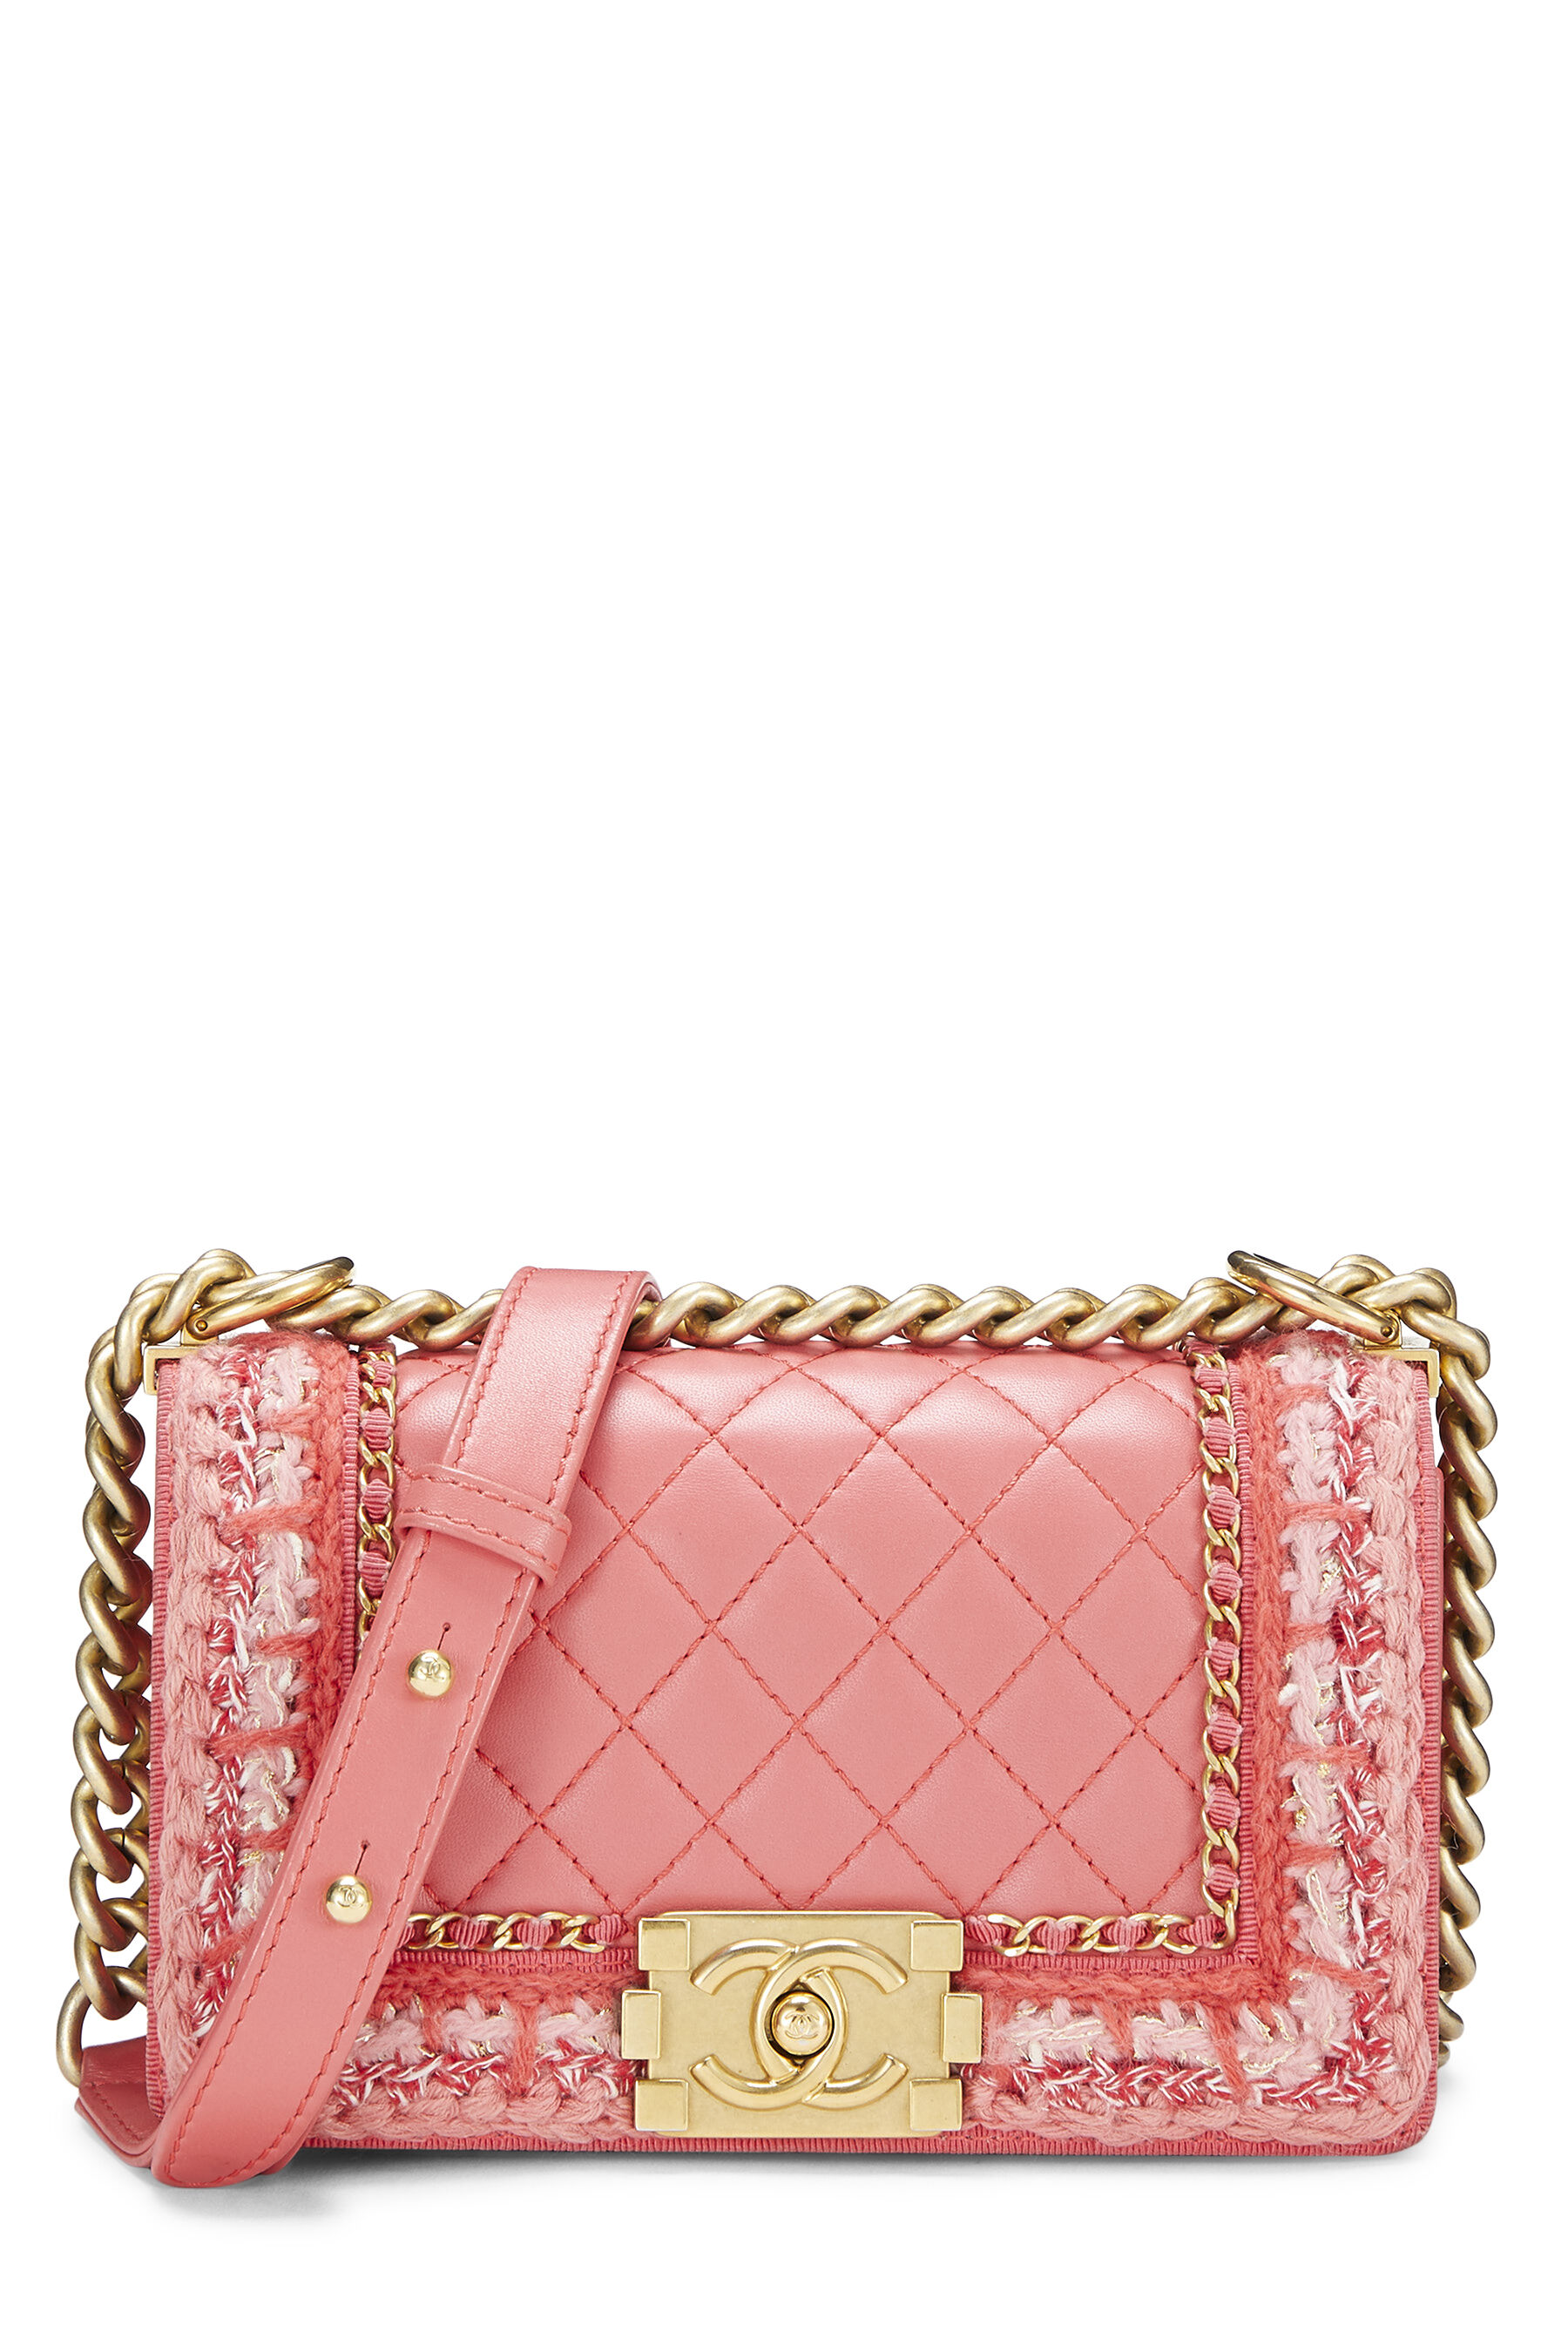 Chanel Pink Quilted Lambskin Tweed Boy Bag